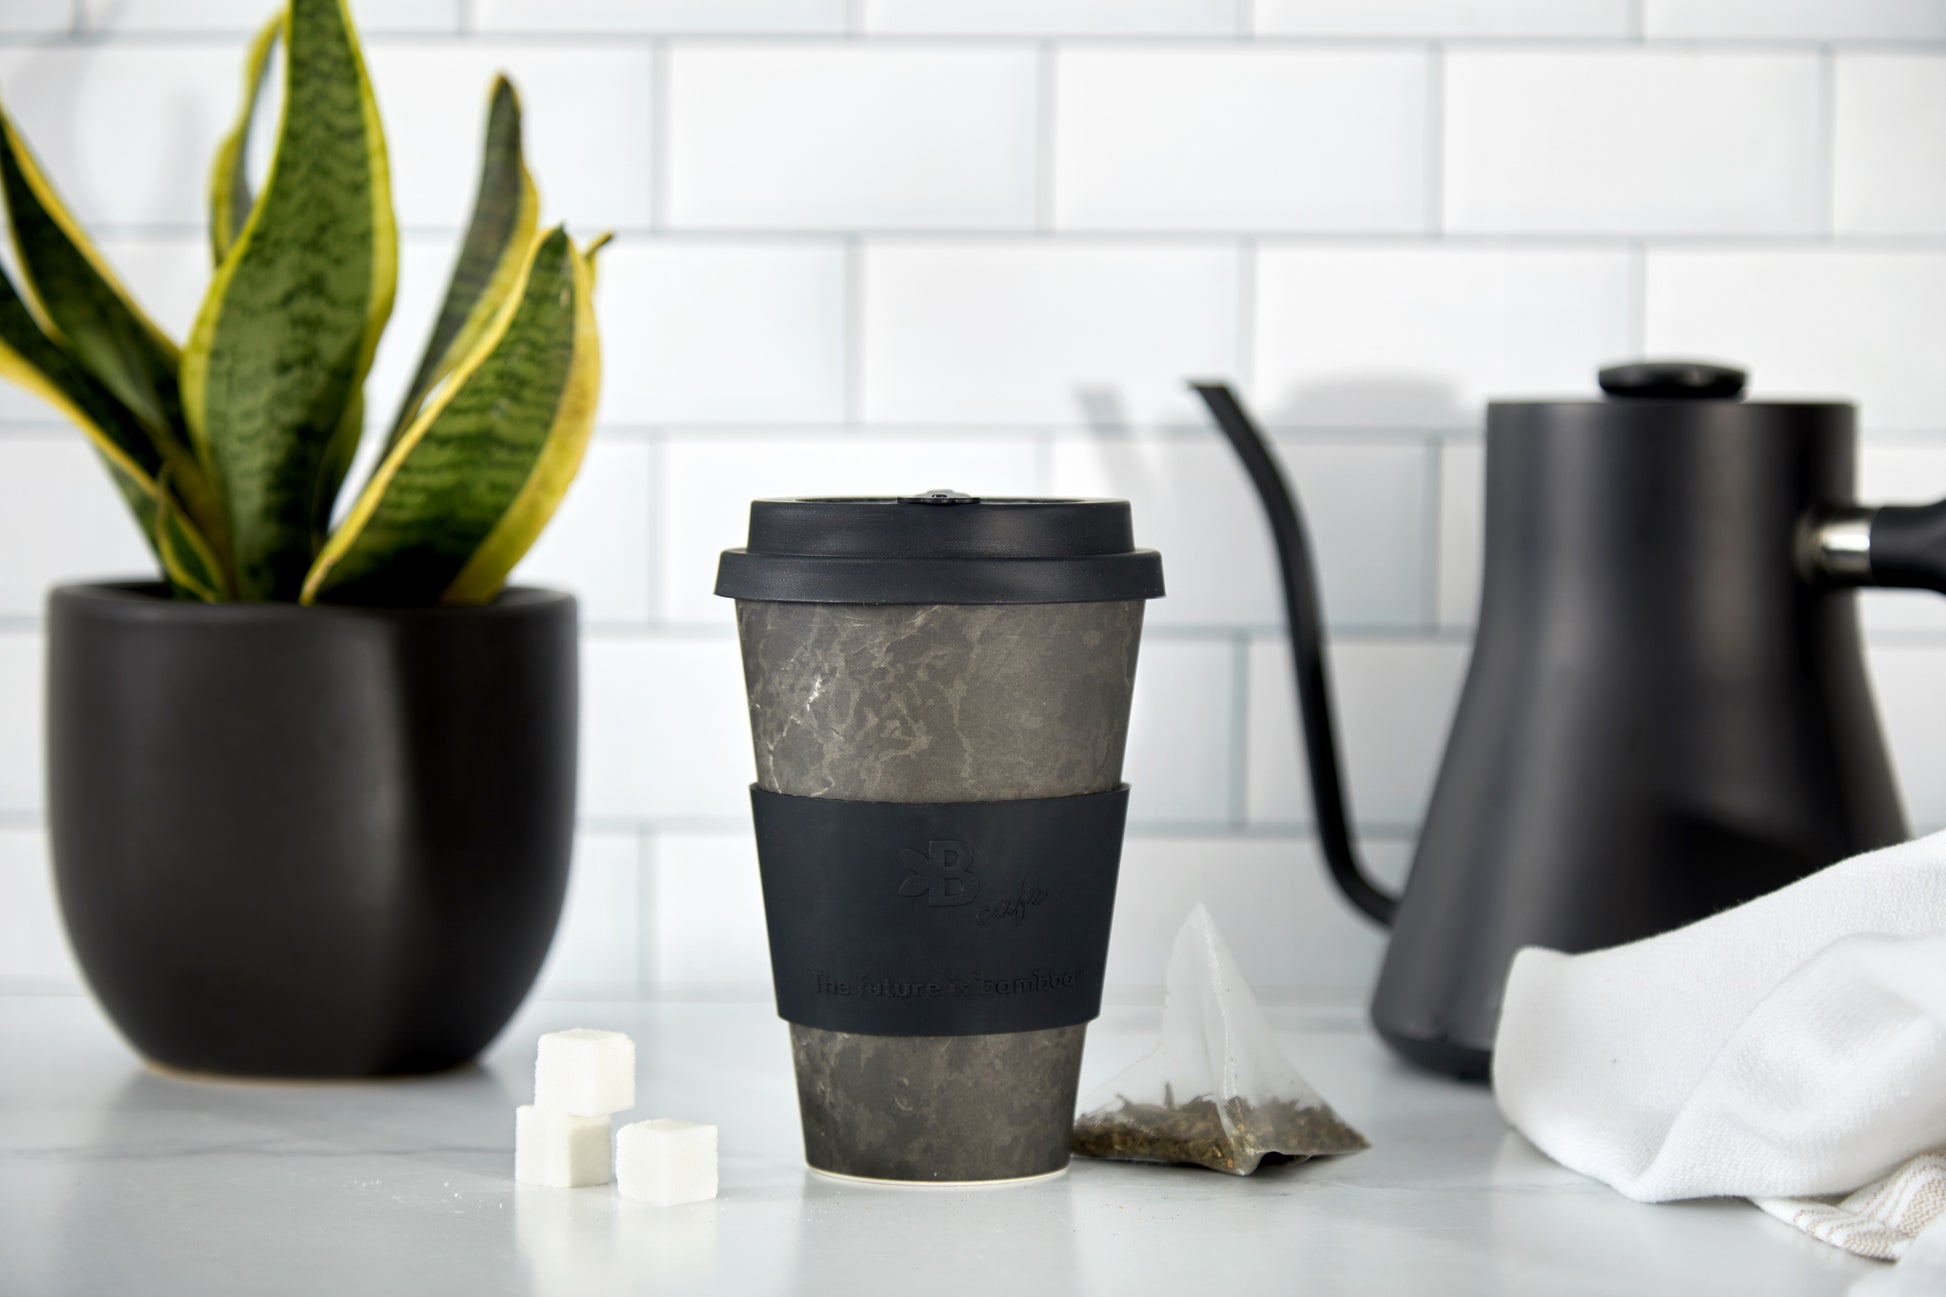 Bamboo Fiber Cup - Onyx Marble - The Future is Bamboo 